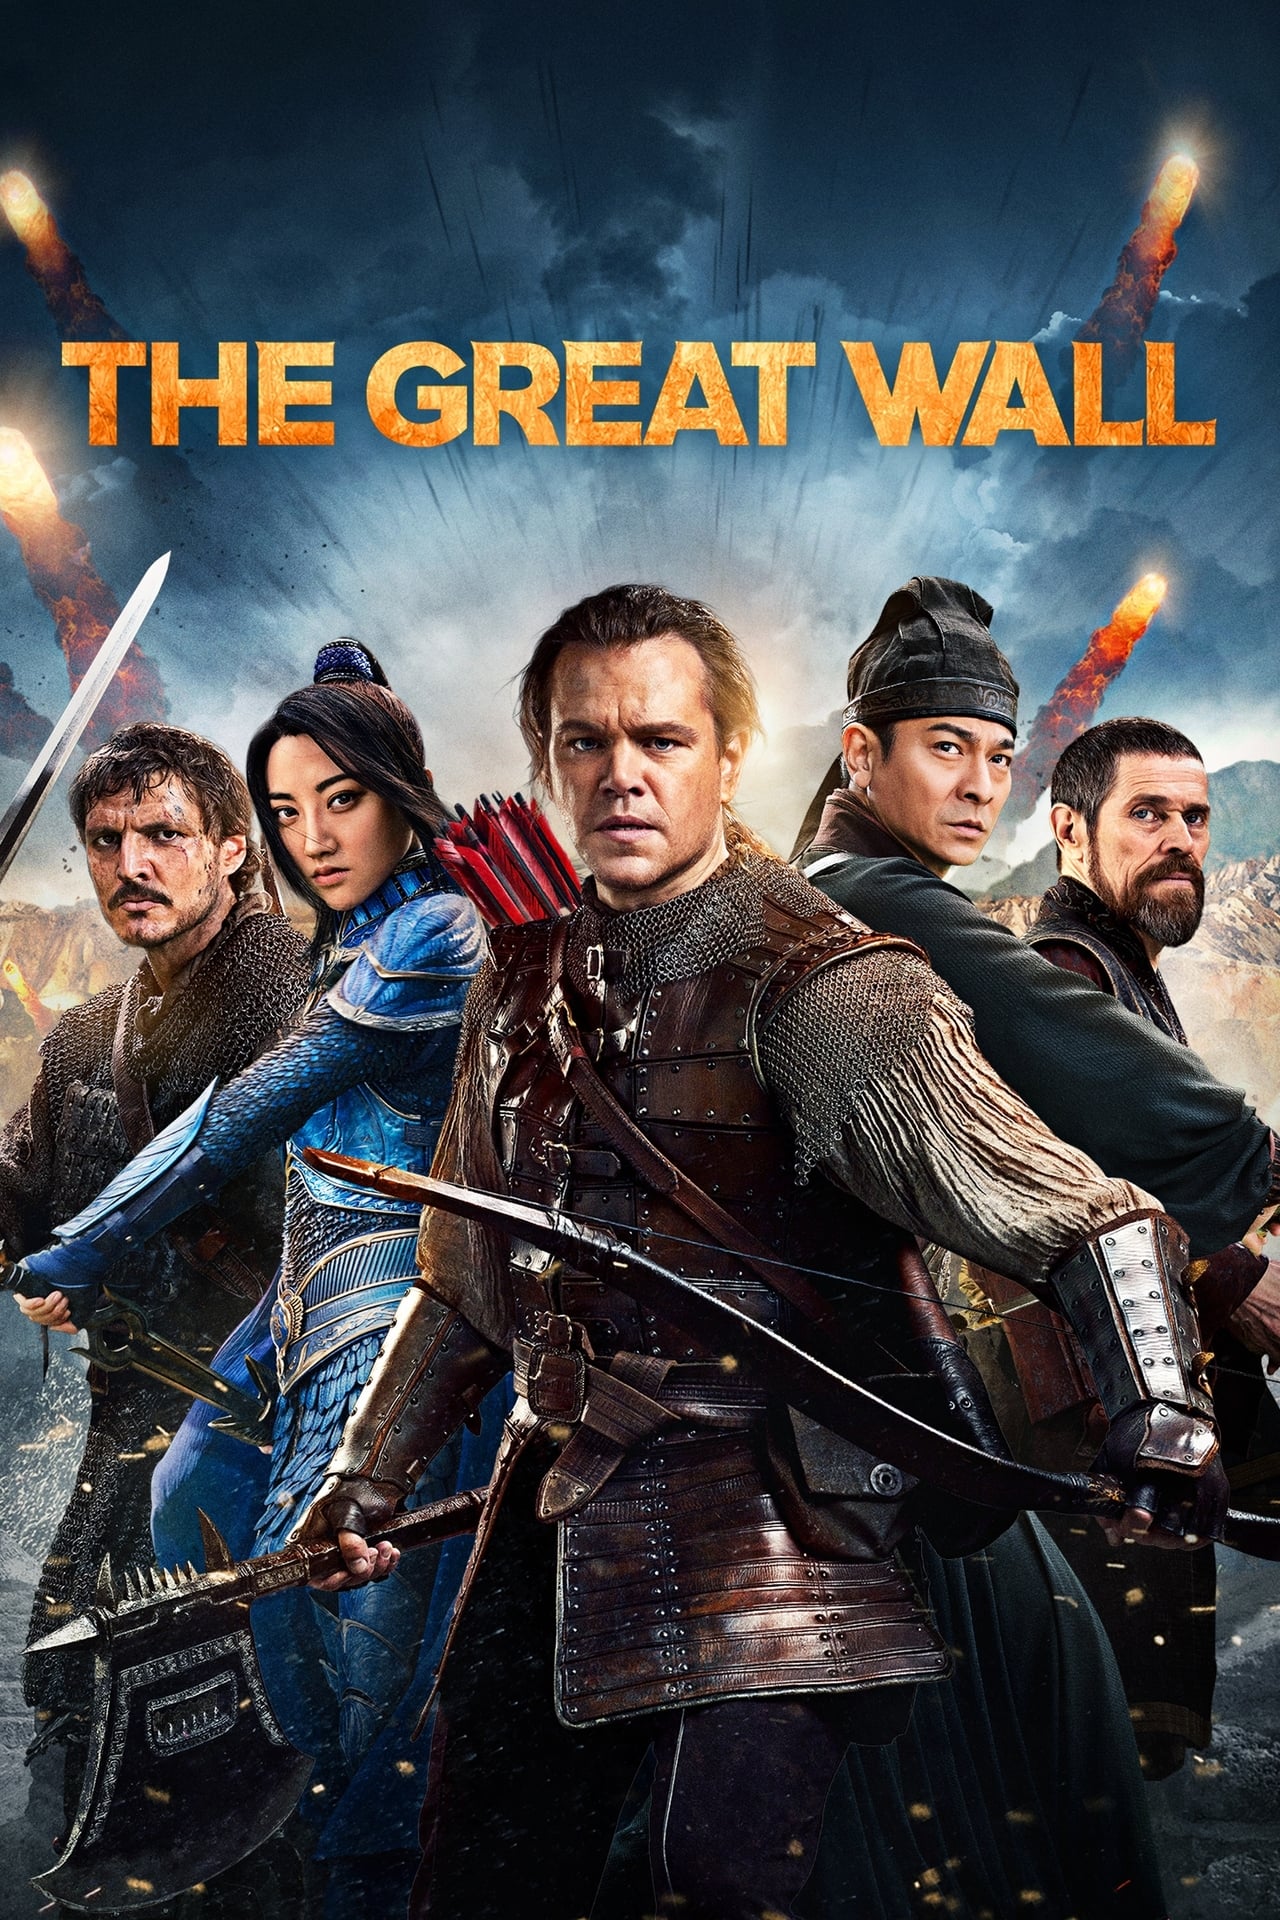 The Great Wall on Netflix